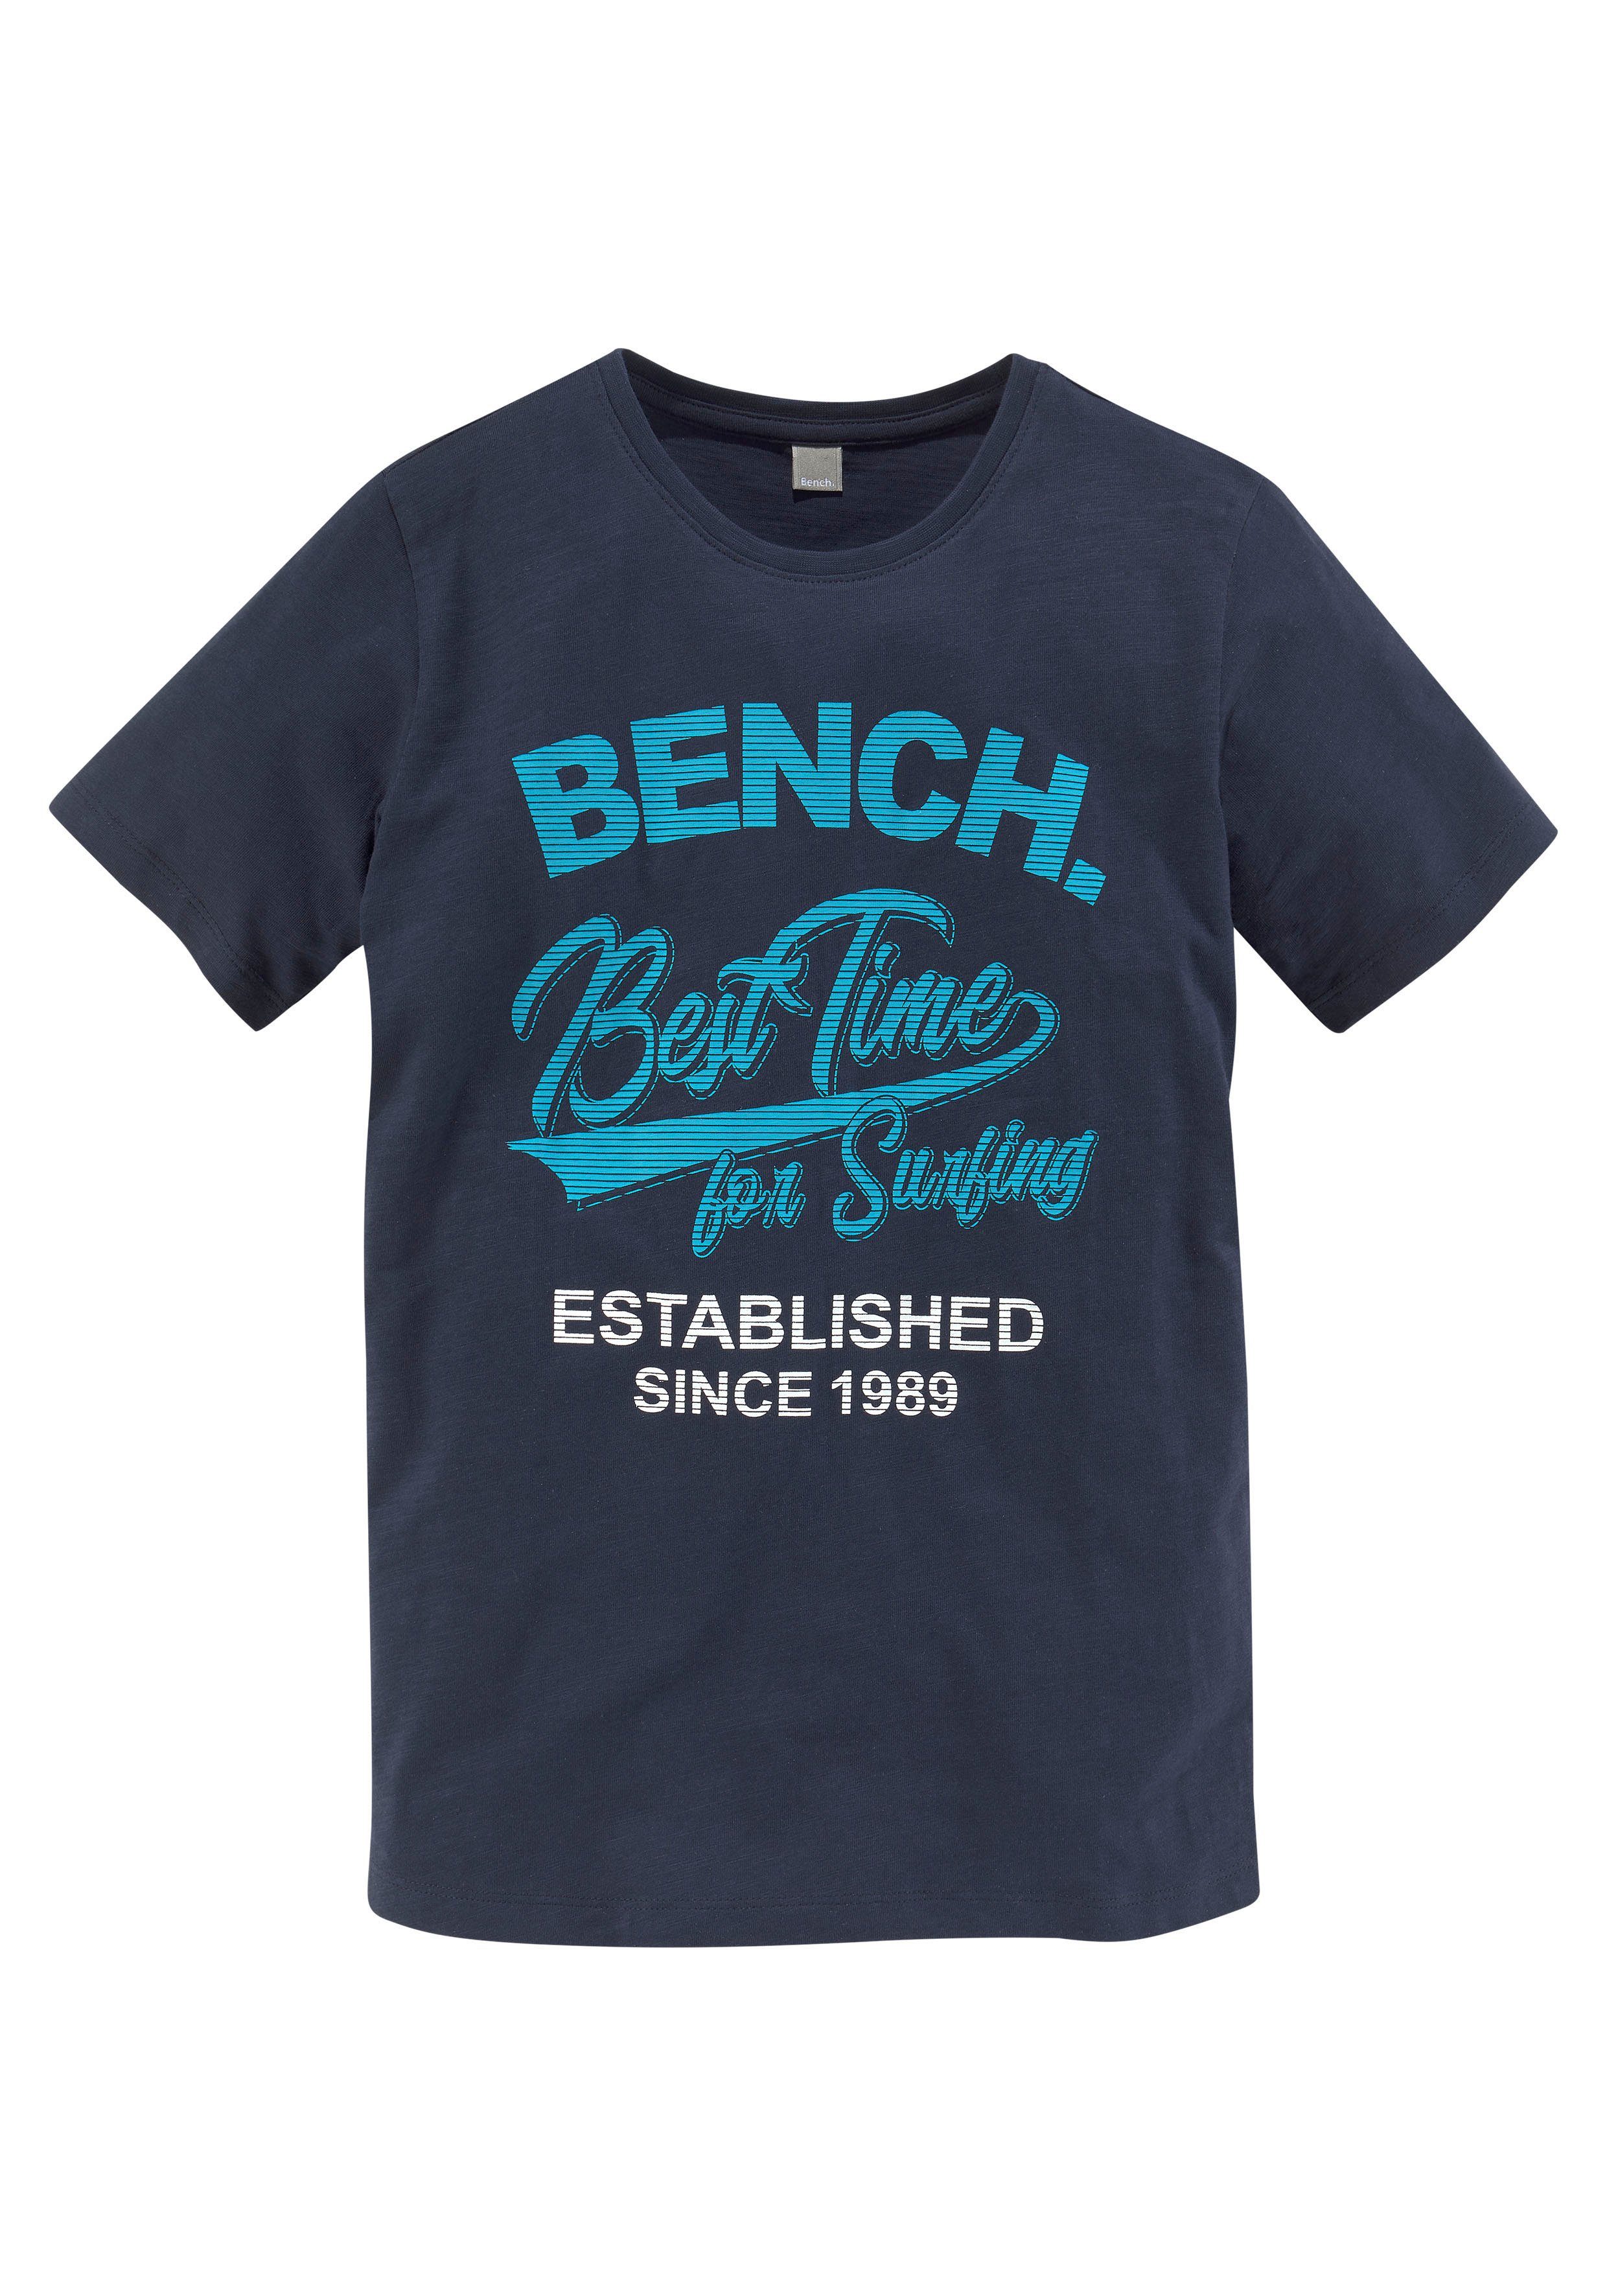 Bench. T-Shirt Best for time surfing